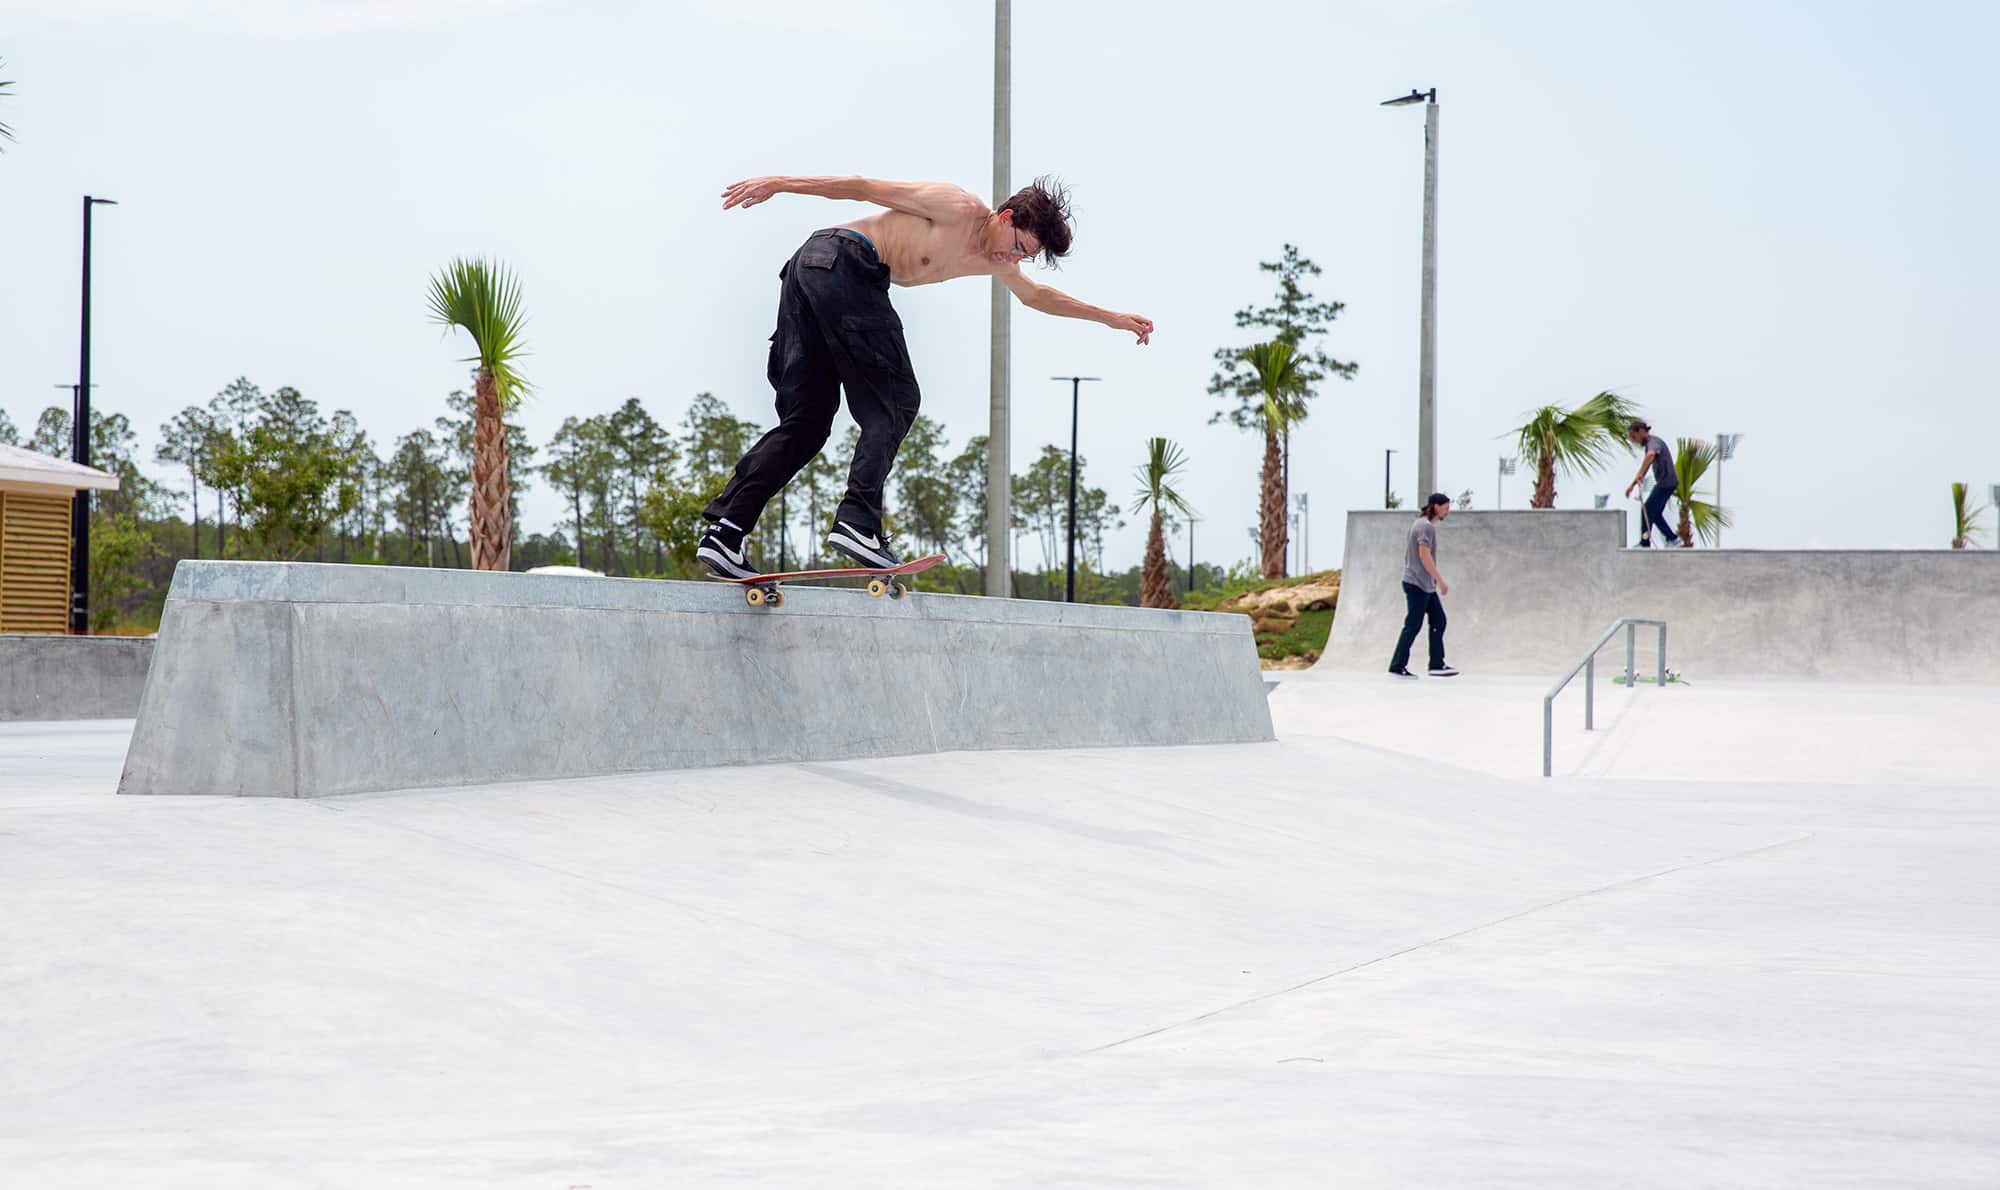 Backside tail on the tall bank to ledge at Panama Beach Florida Skatepark in Bay County